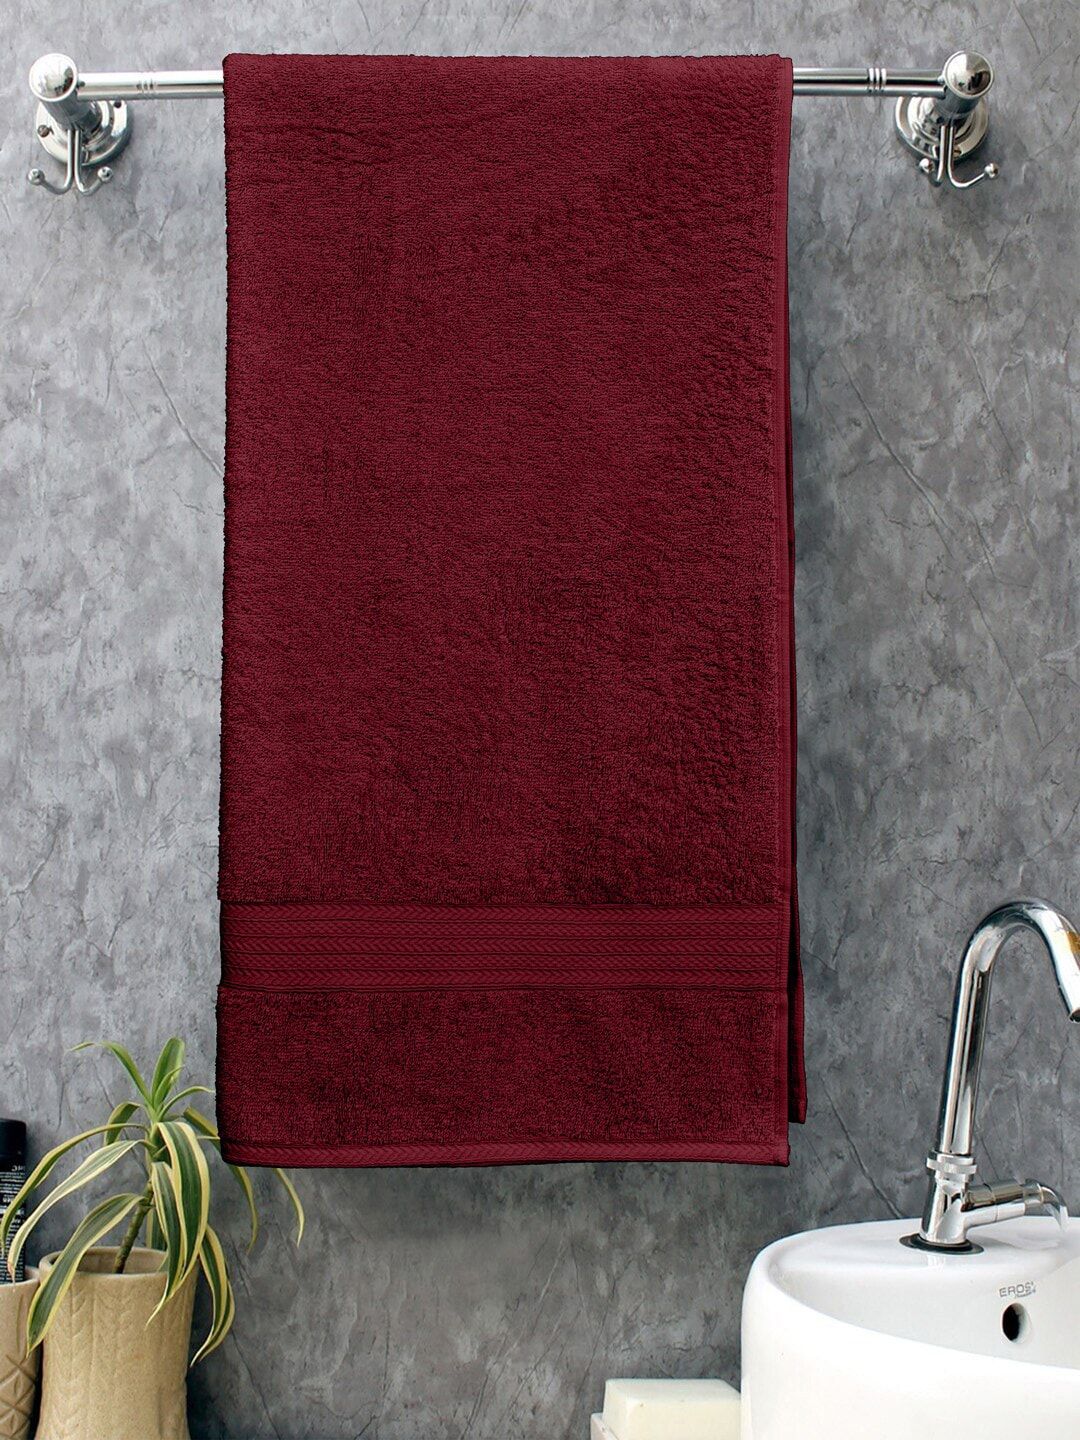 BOMBAY DYEING Maroon Solid Cotton 450 GSM Bath Towel Price in India